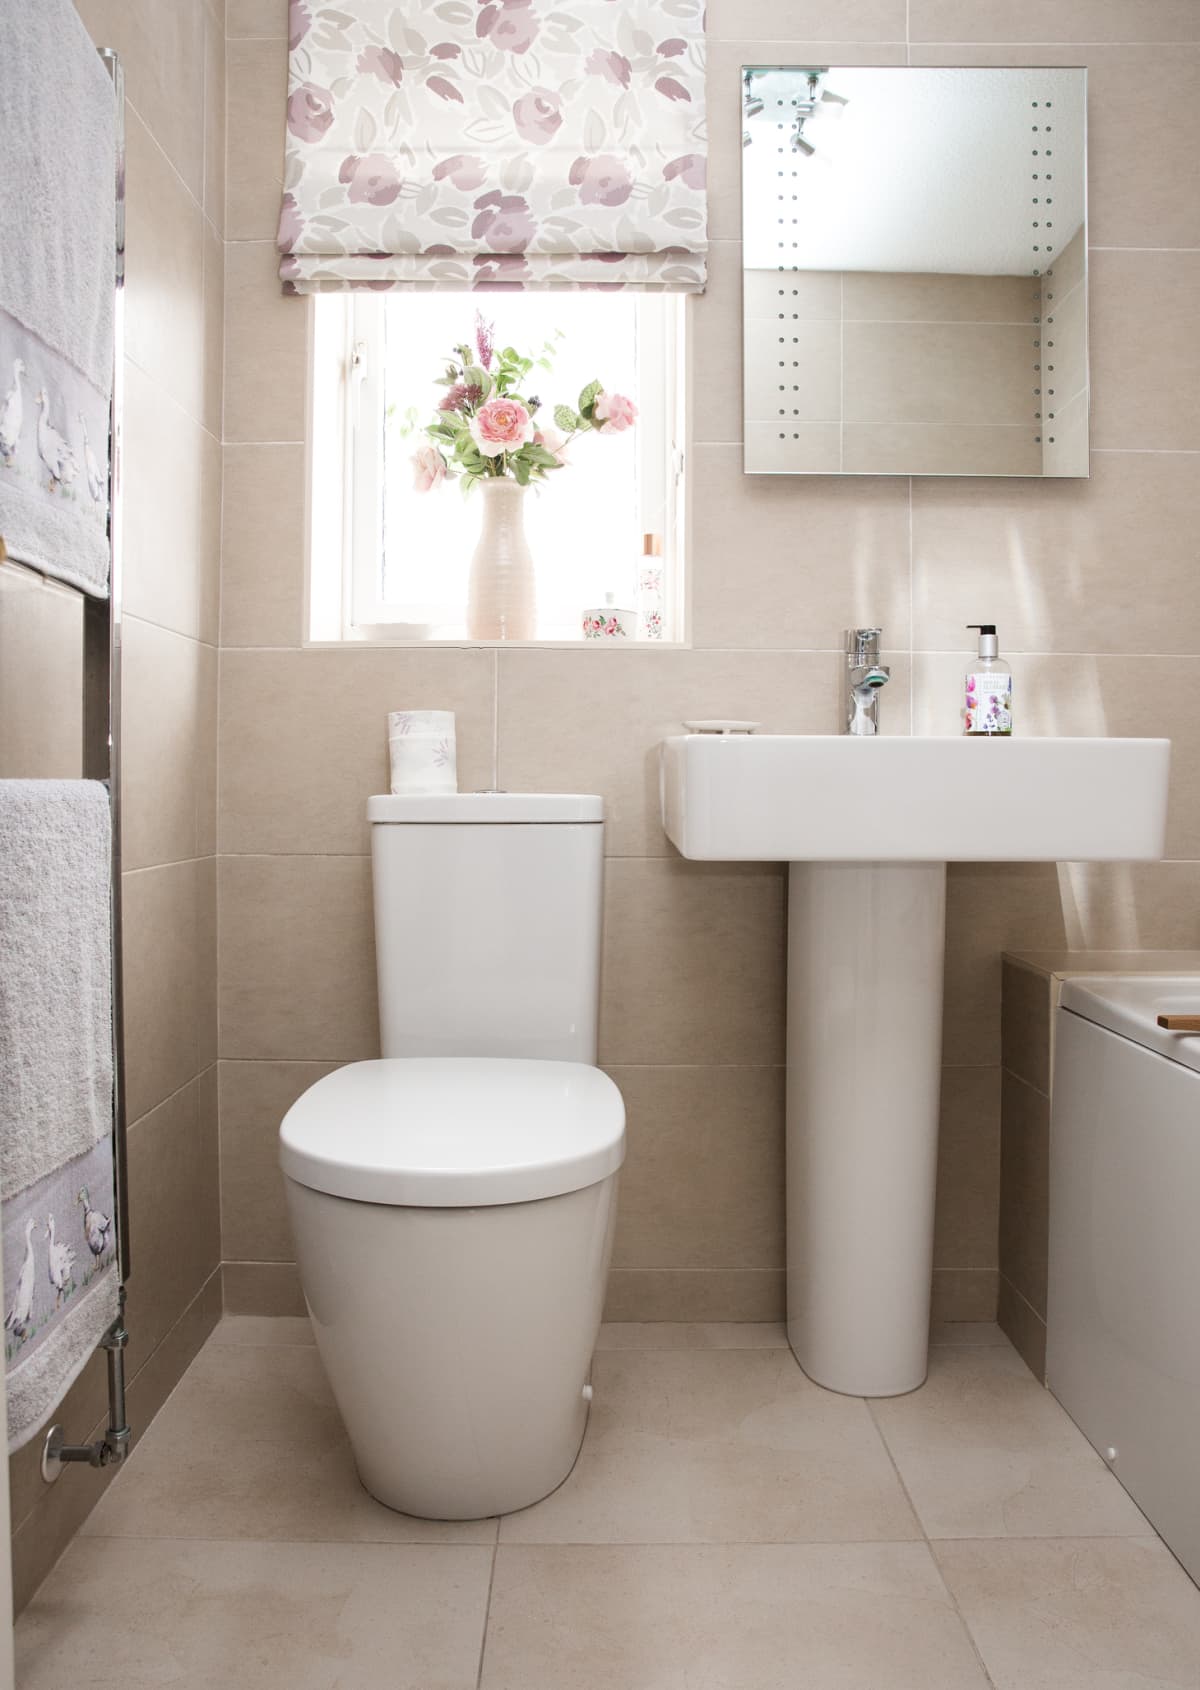 Contemporary tiled bathroom with white bathroom suite including toilet and sink basin